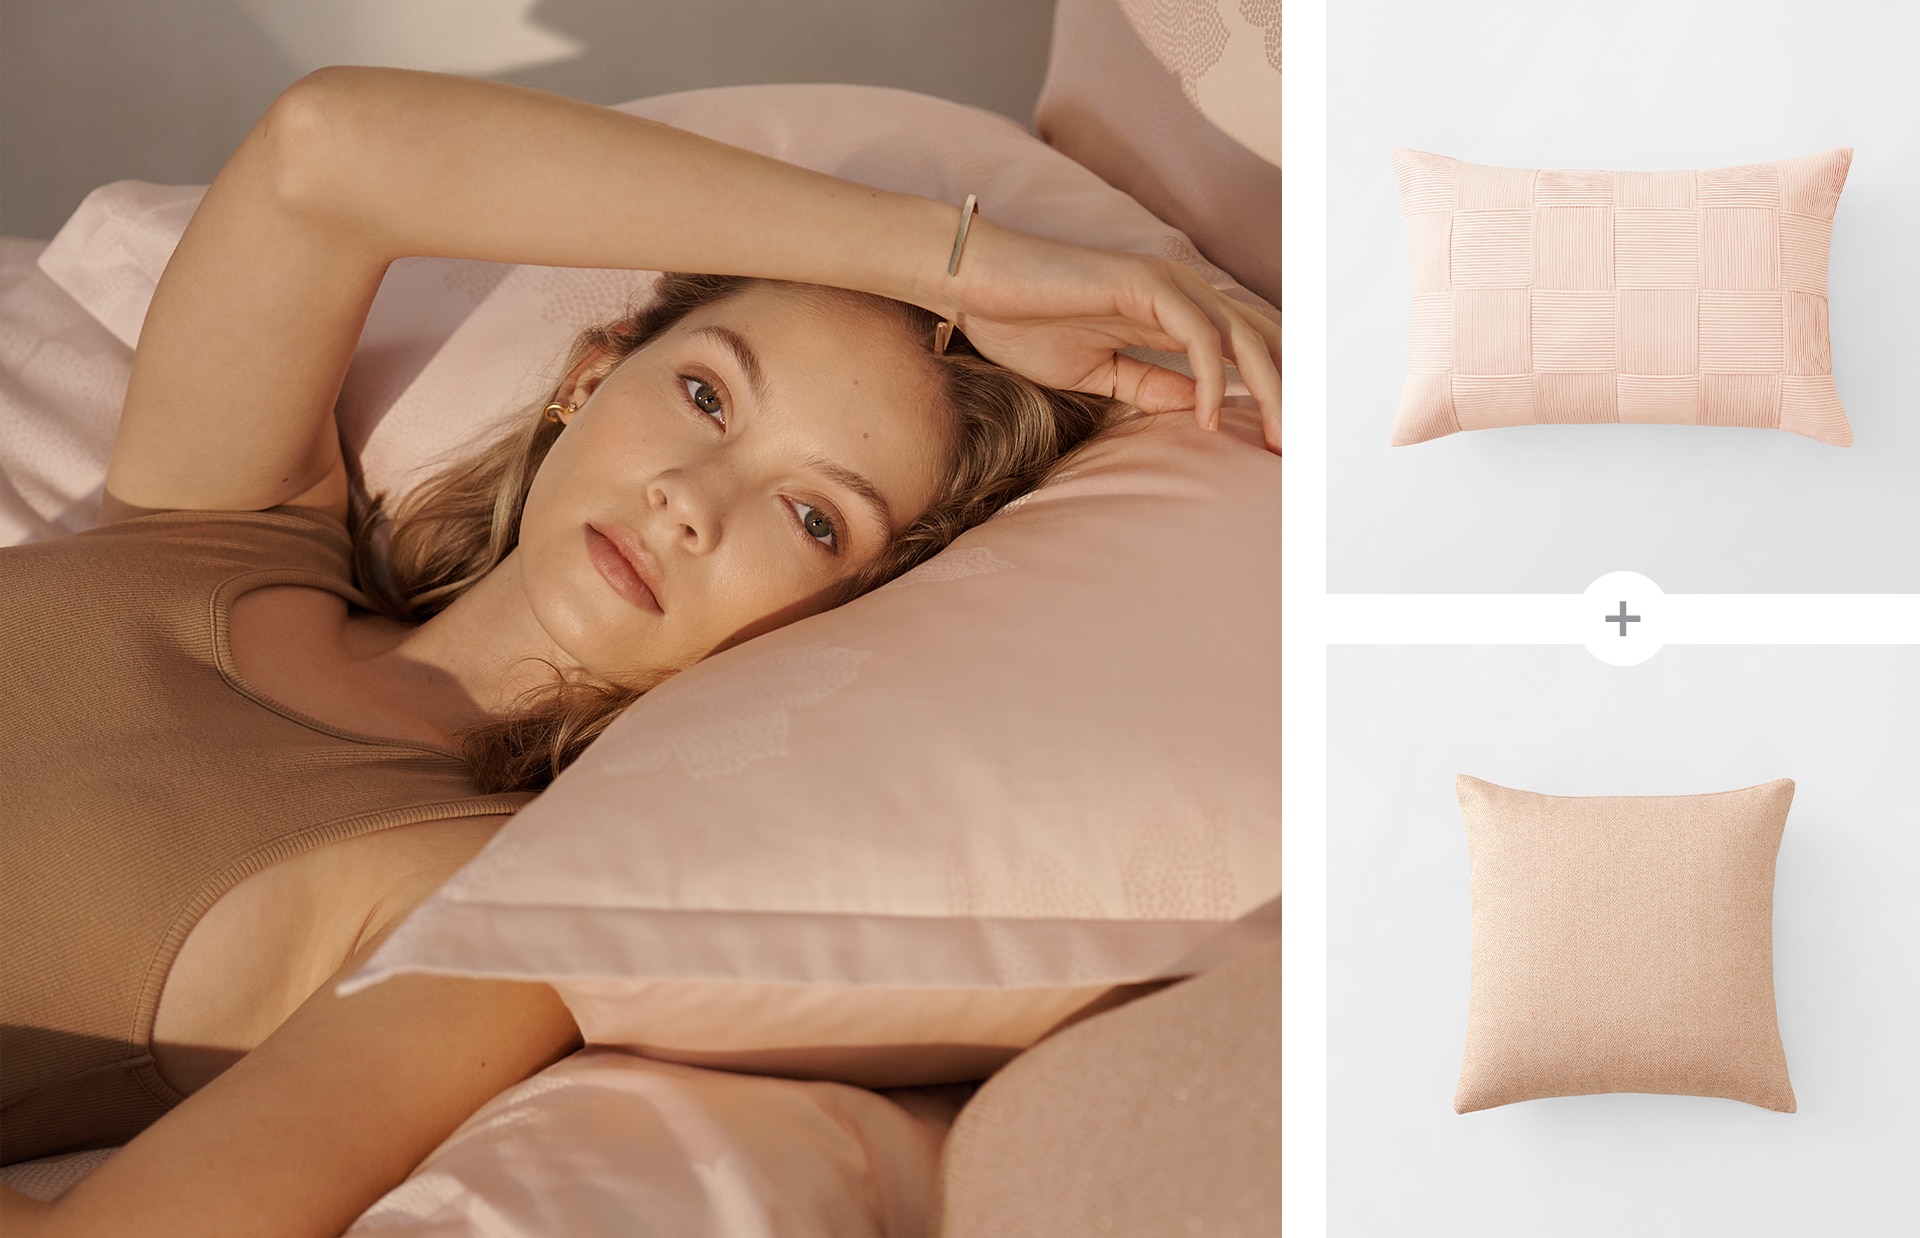 split image. left side white woman with blonde hair stairs at the camera, laying on pink bed with her arm above of her head on pink pillow. right side is split in image, with pink breakfast cushion and pink metallic square cushion.